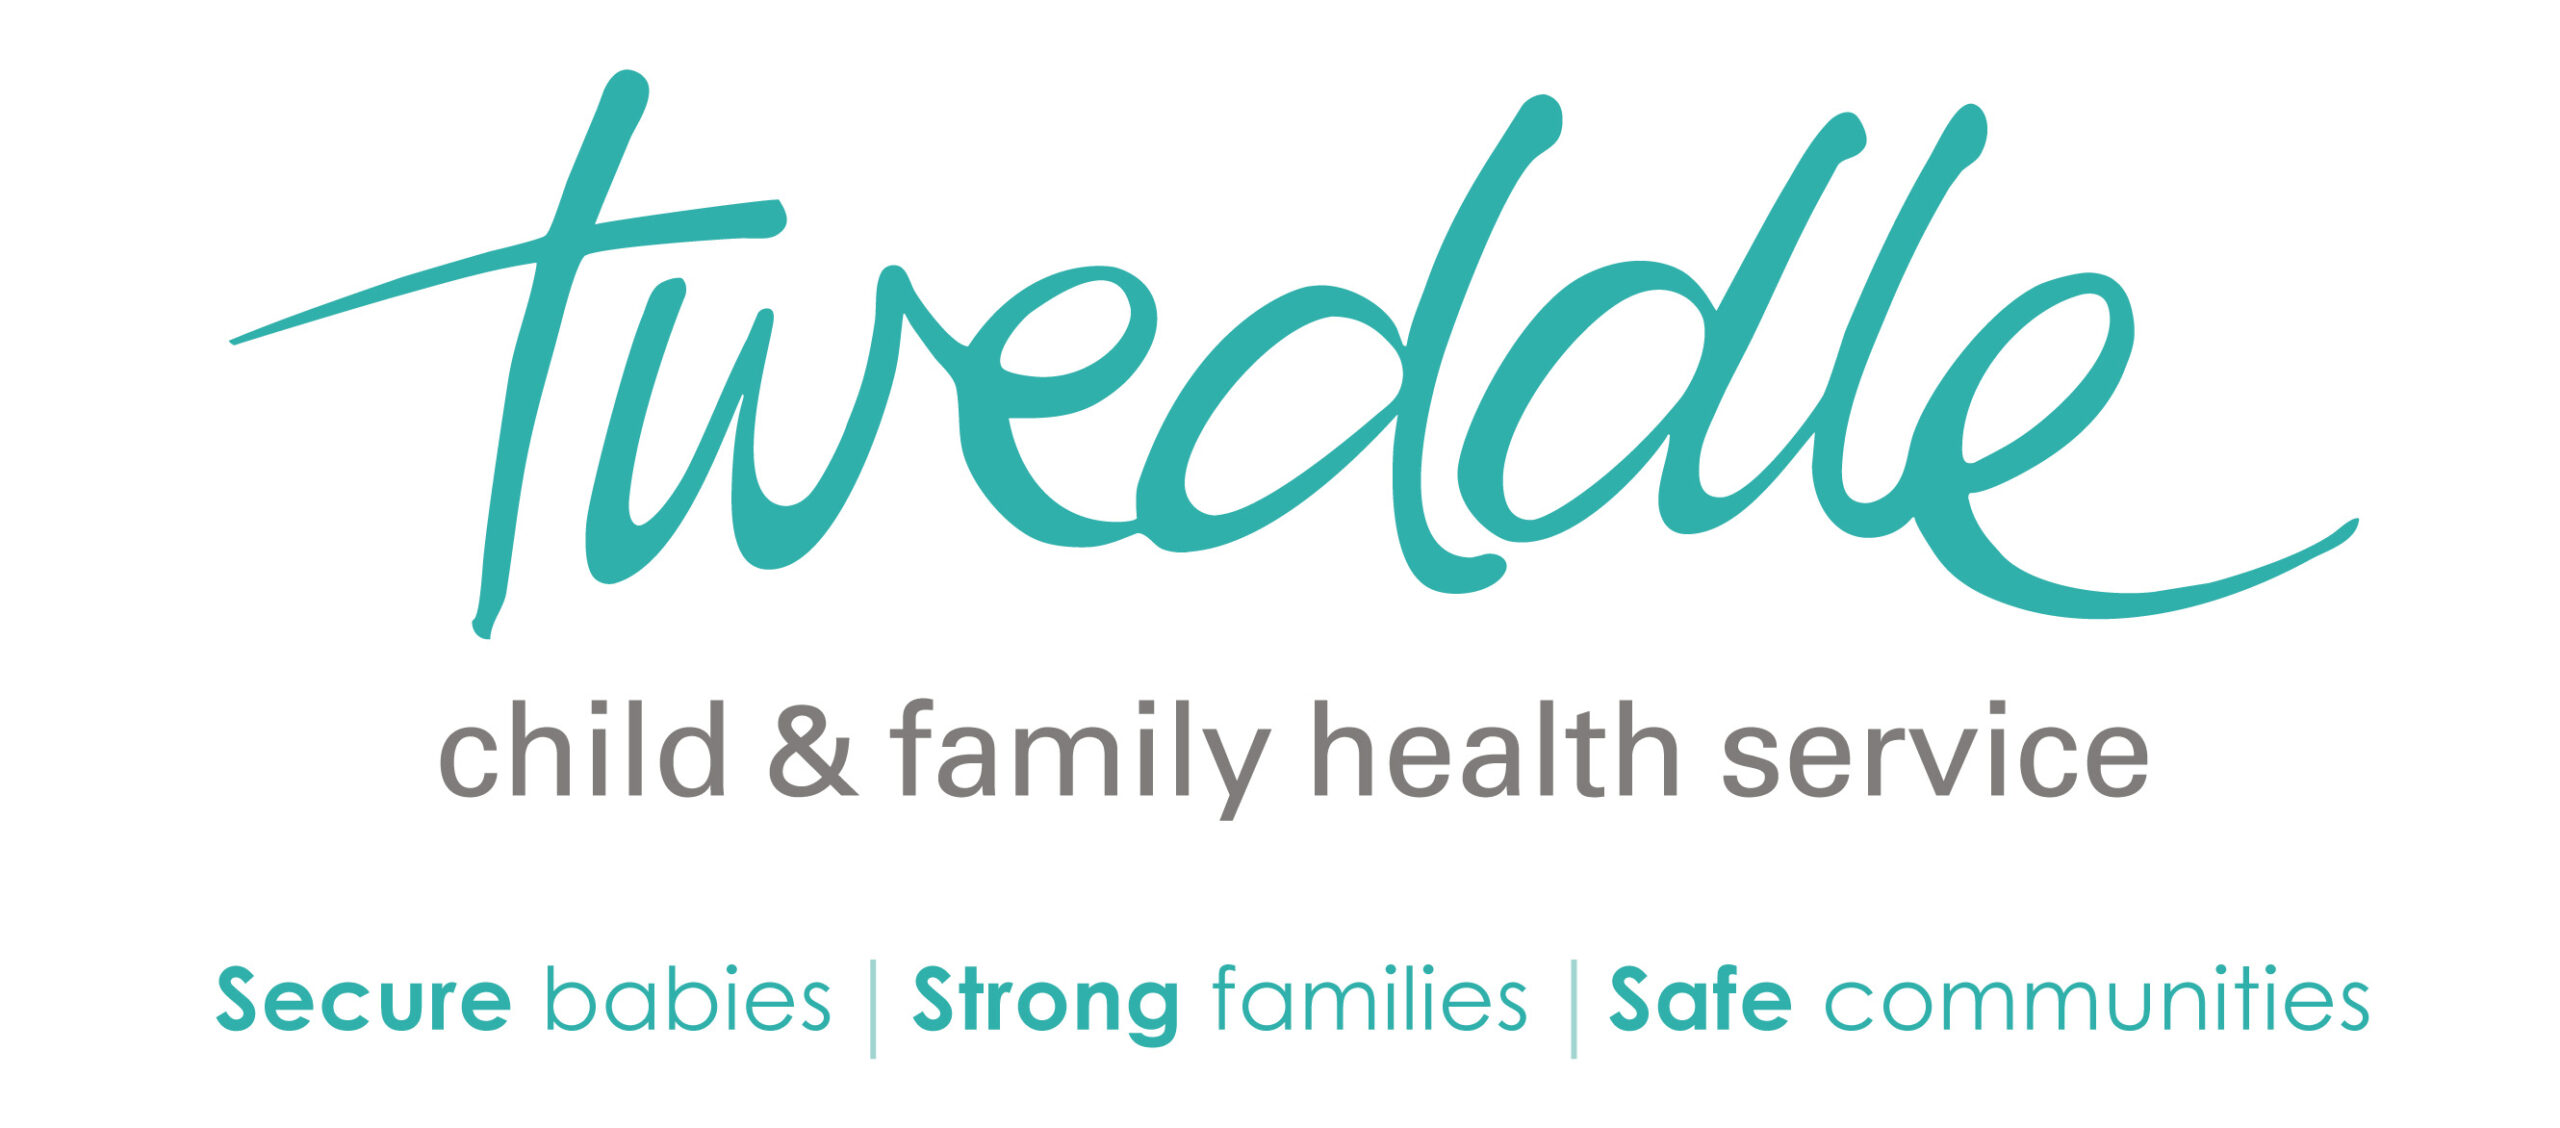 Tweddle Child and Family Health Service Trademark and catchphrase 'Secure babies, strong families, safe communities'